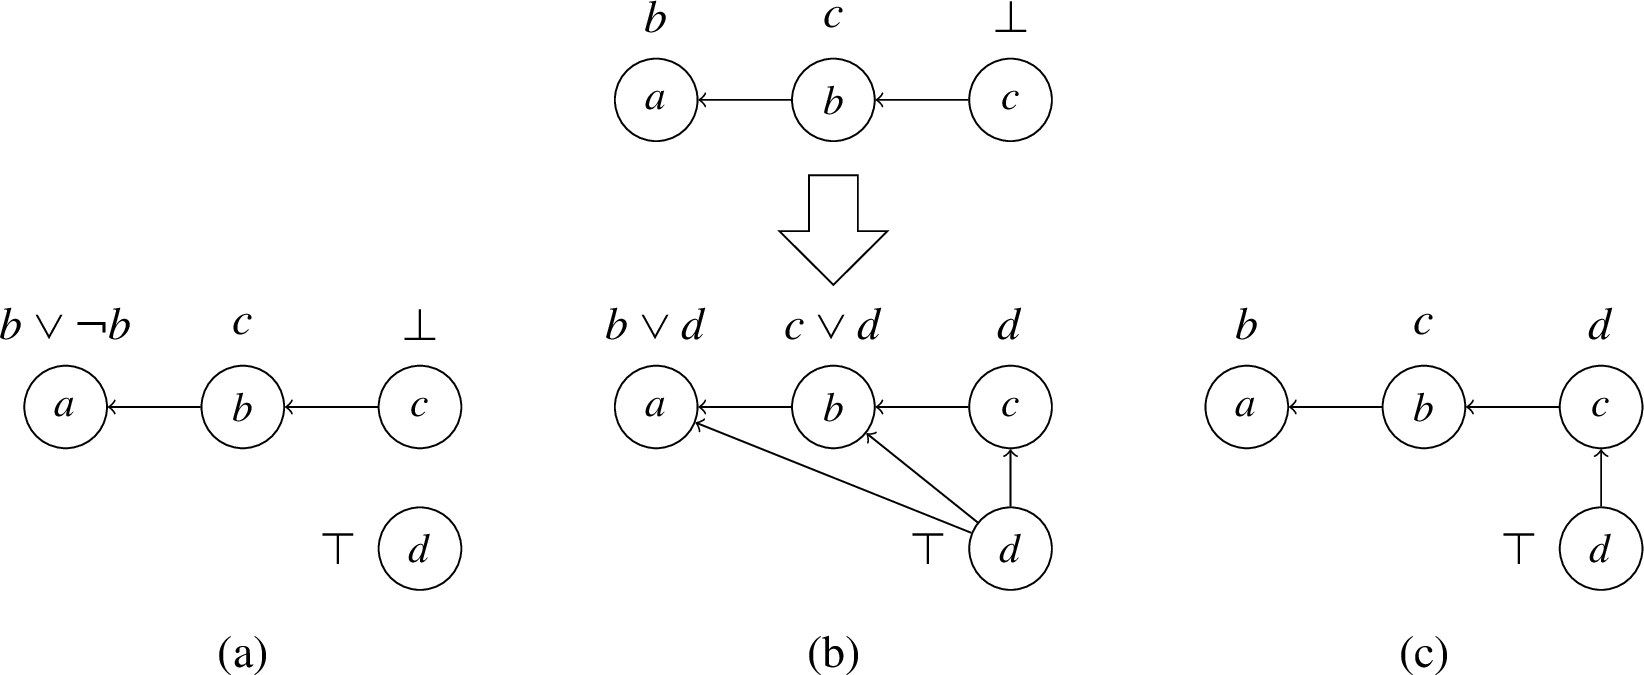 Enforcing a being true in an admissible interpretation via support enforcement: without further constraints (a), without modifying acceptance conditions when expanded arguments are rejected (b), and additionally when optimizing added links (Example 14).